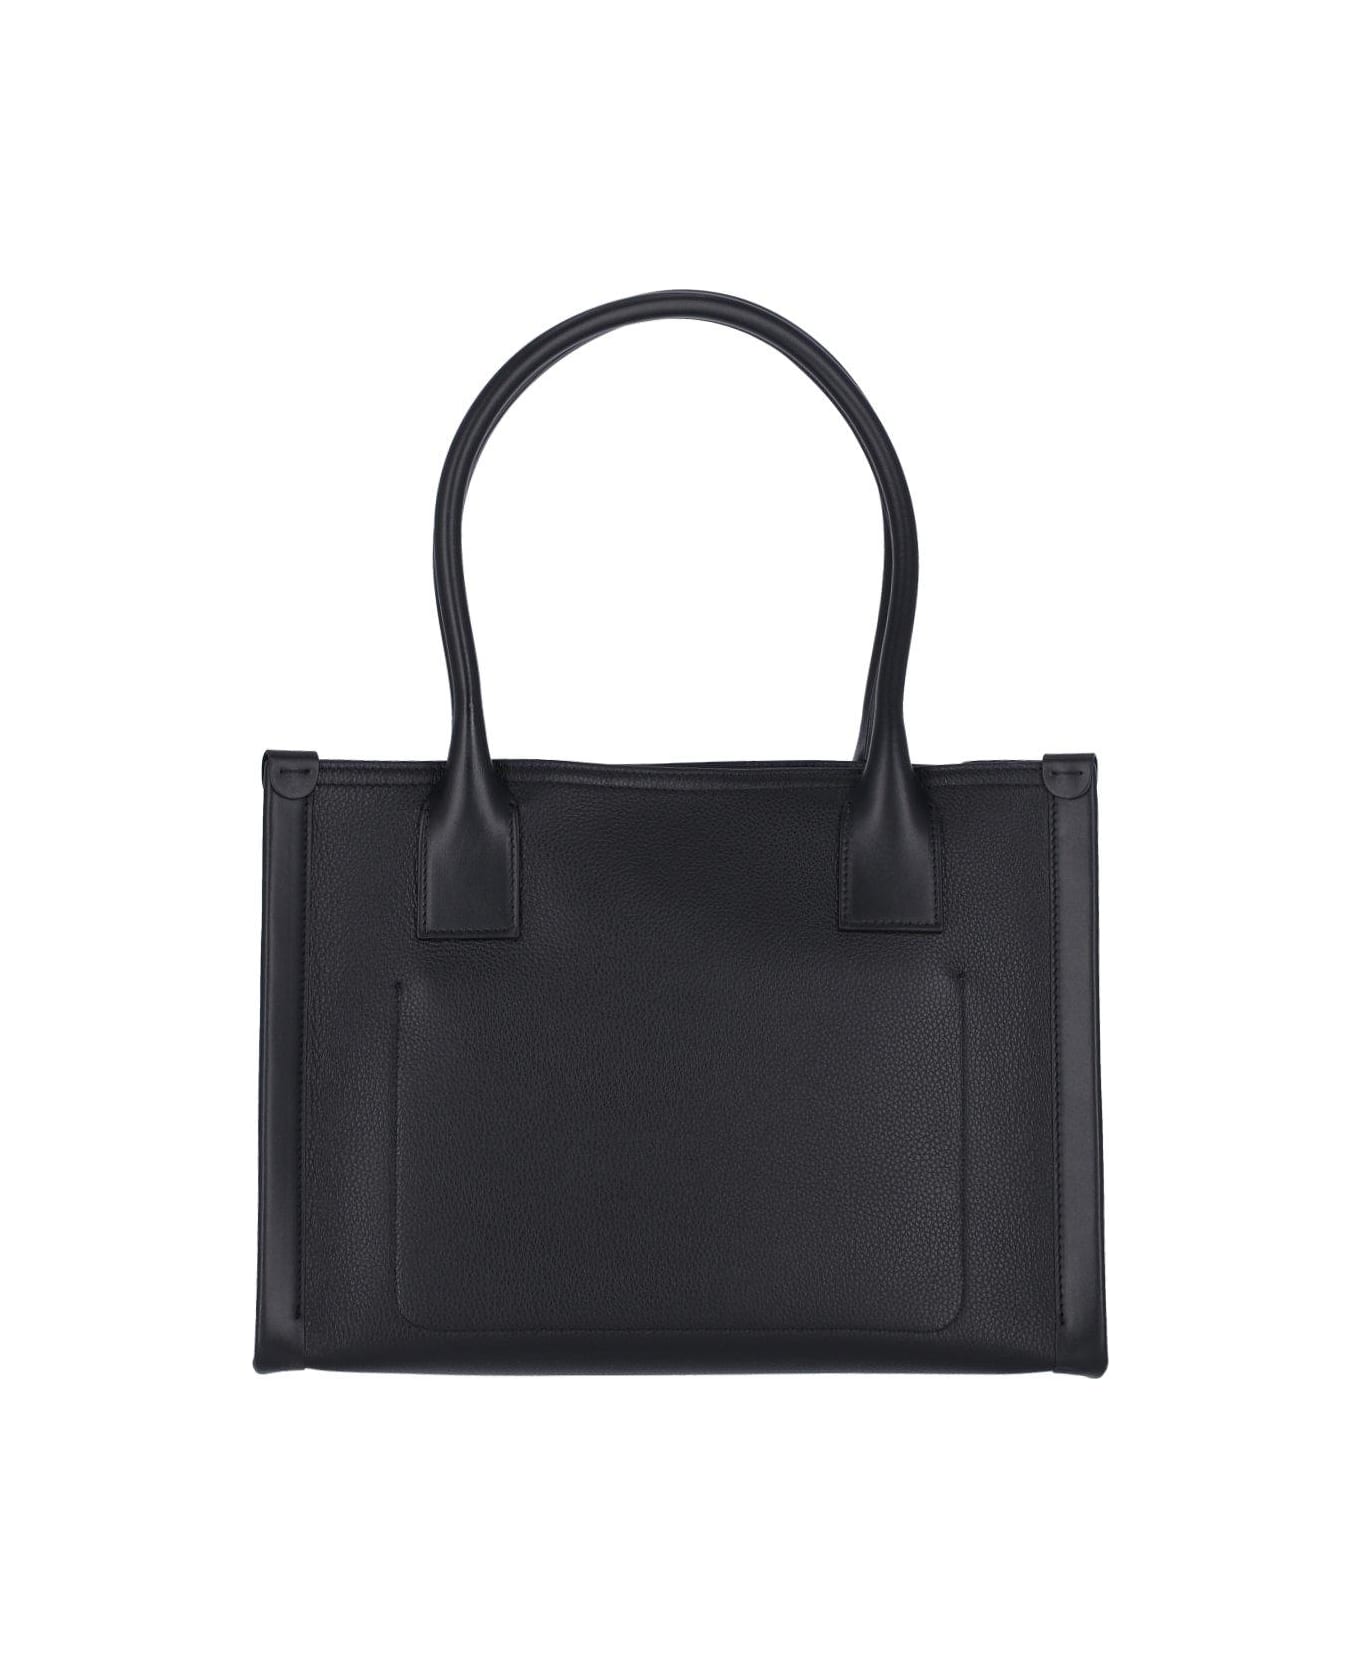 Christian Louboutin By My Side Small Tote Bag - Black/black/black トートバッグ